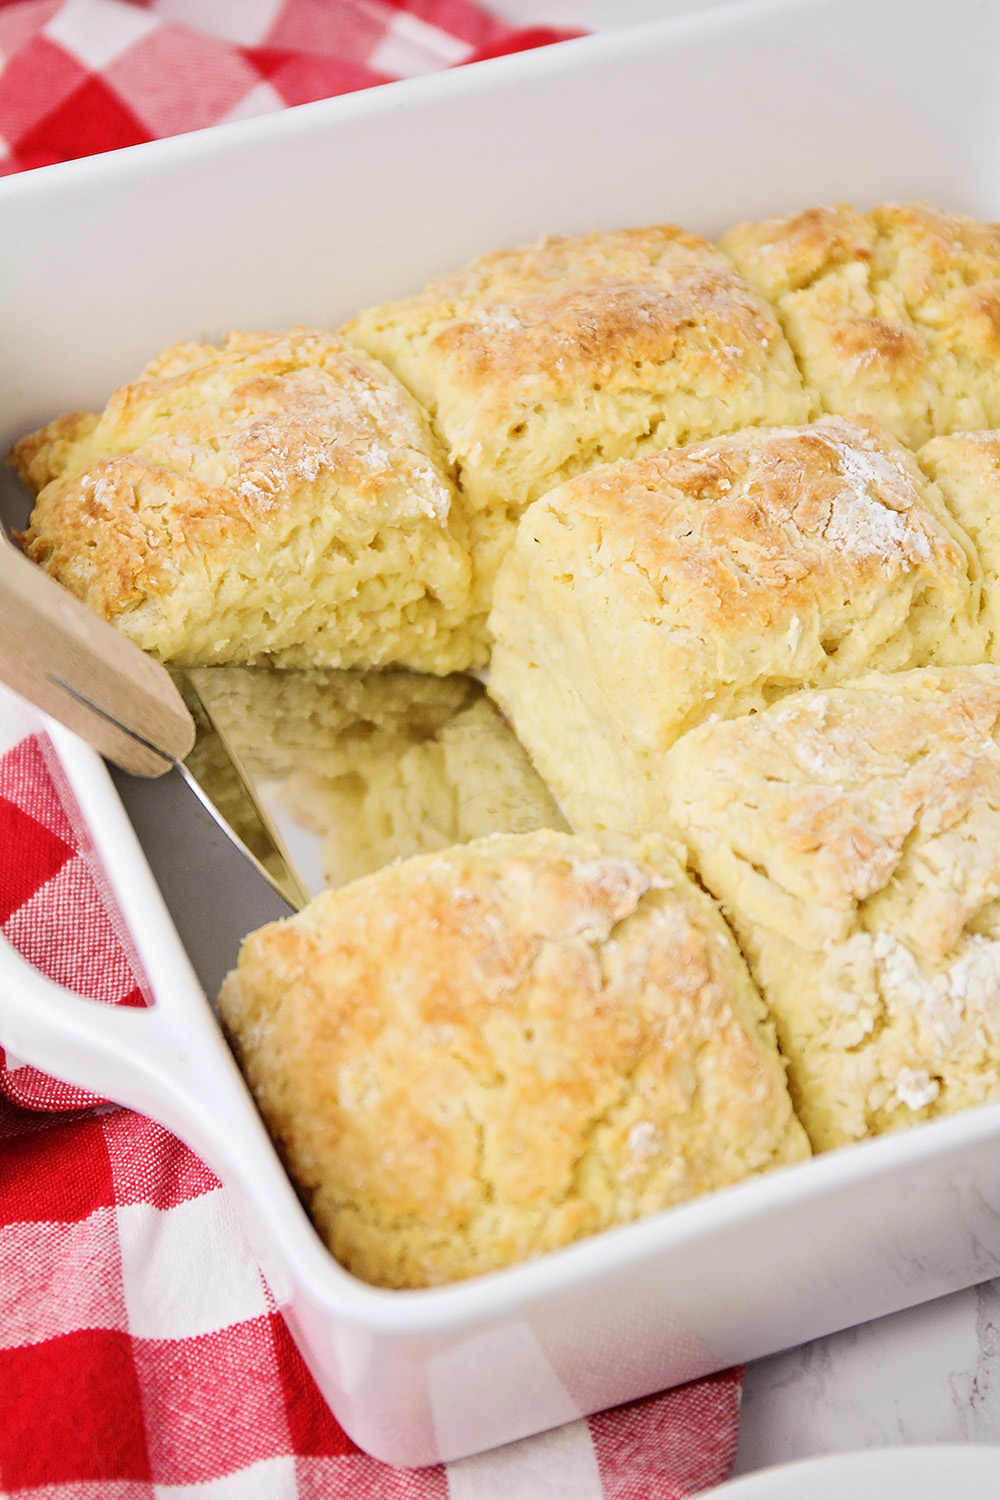 These mile high biscuits are so soft and fluffy, and ready in about 30 minutes. They're the perfect complement to soups or stews, and so delicious!